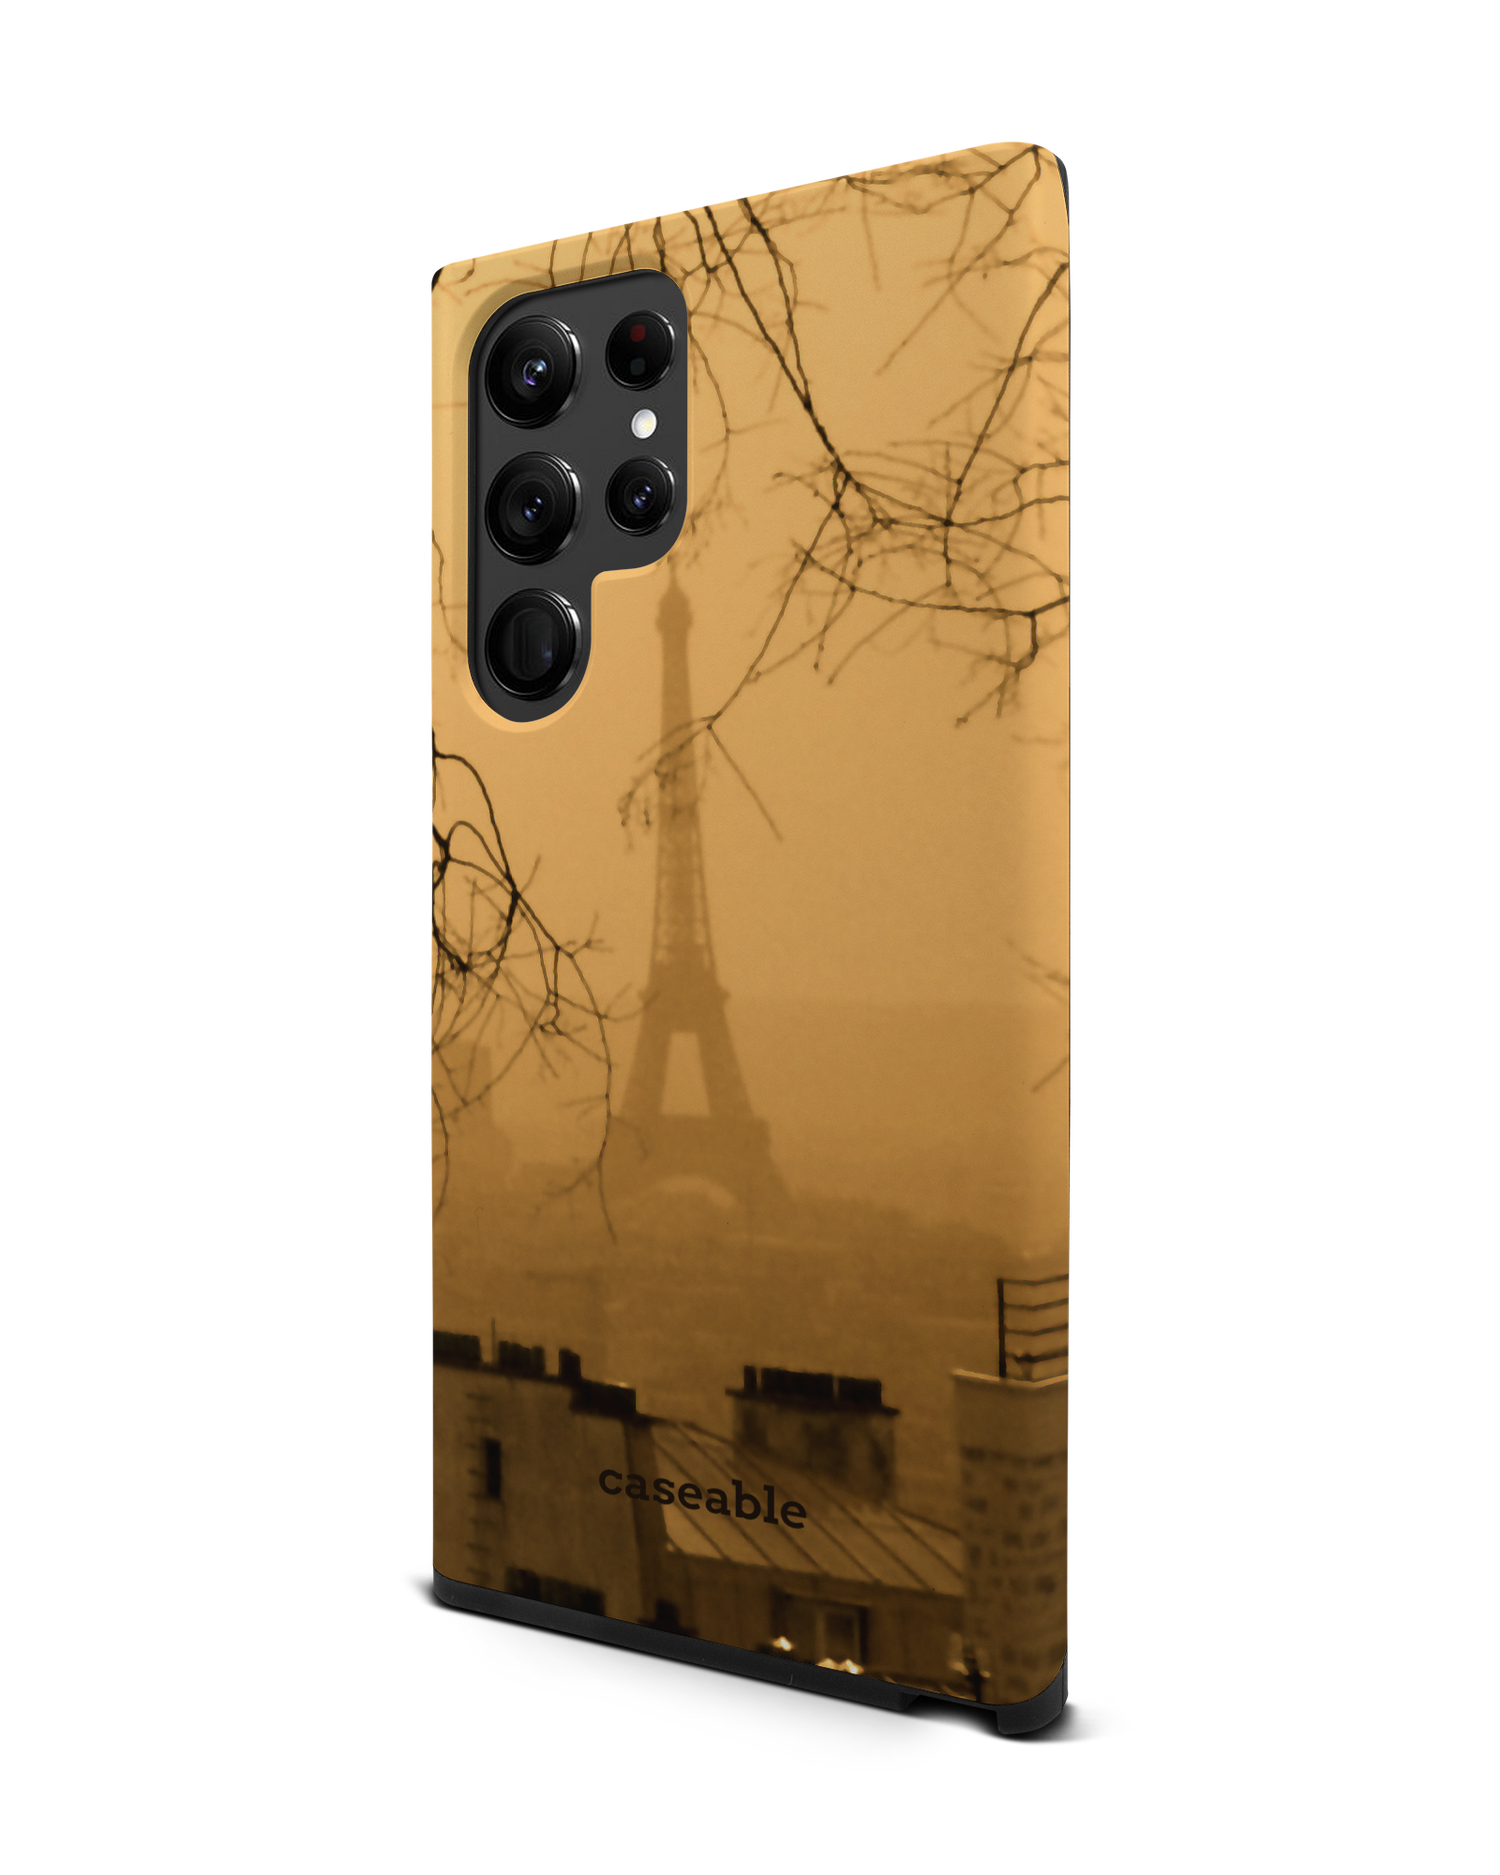 Paris Premium Phone Case Samsung Galaxy S22 Ultra 5G: View from the right side